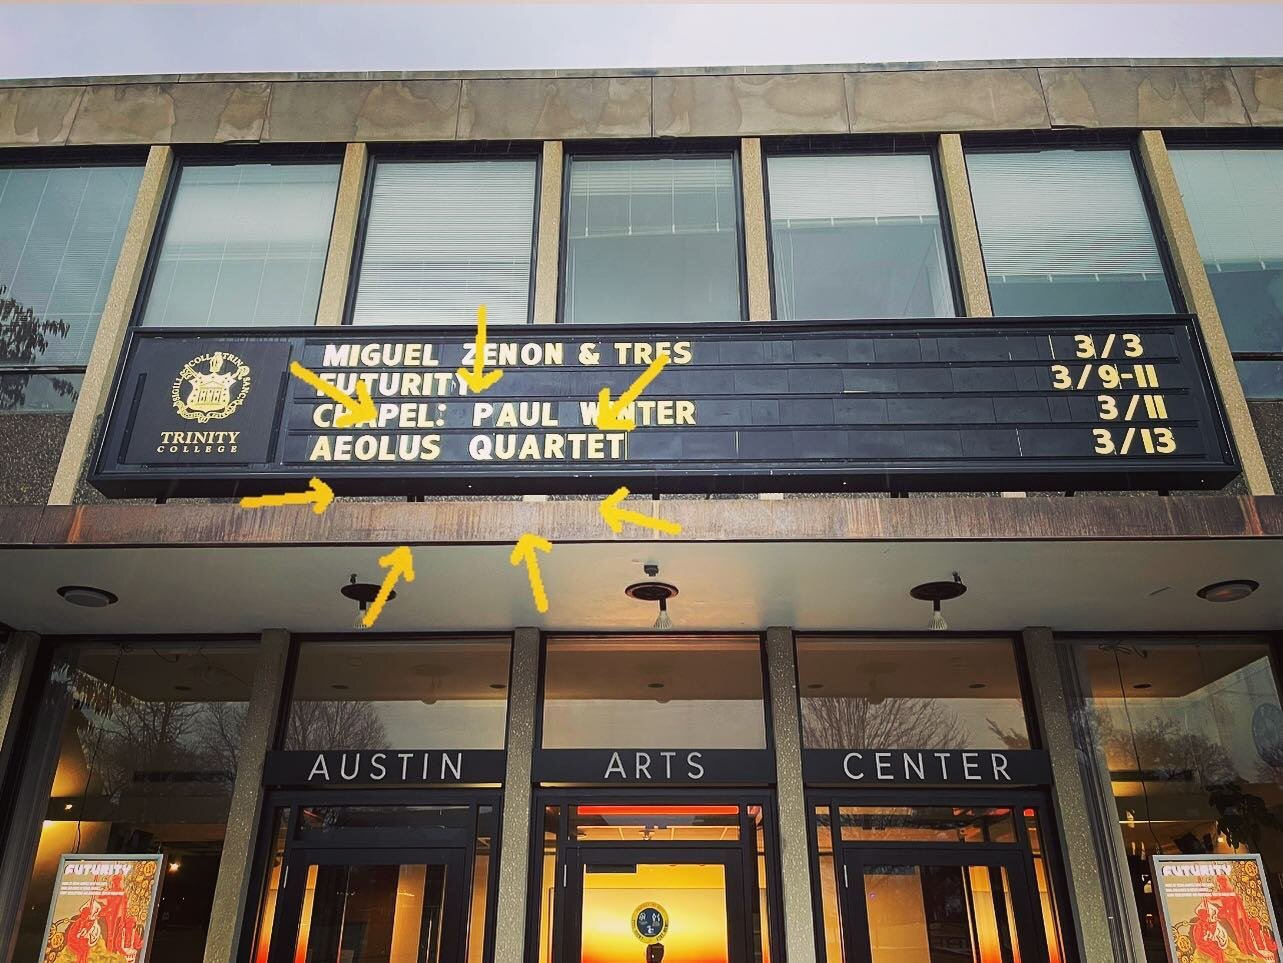 Concert at Austin Arts Center tonight at 7:30&hellip;come on over and out of the rain!